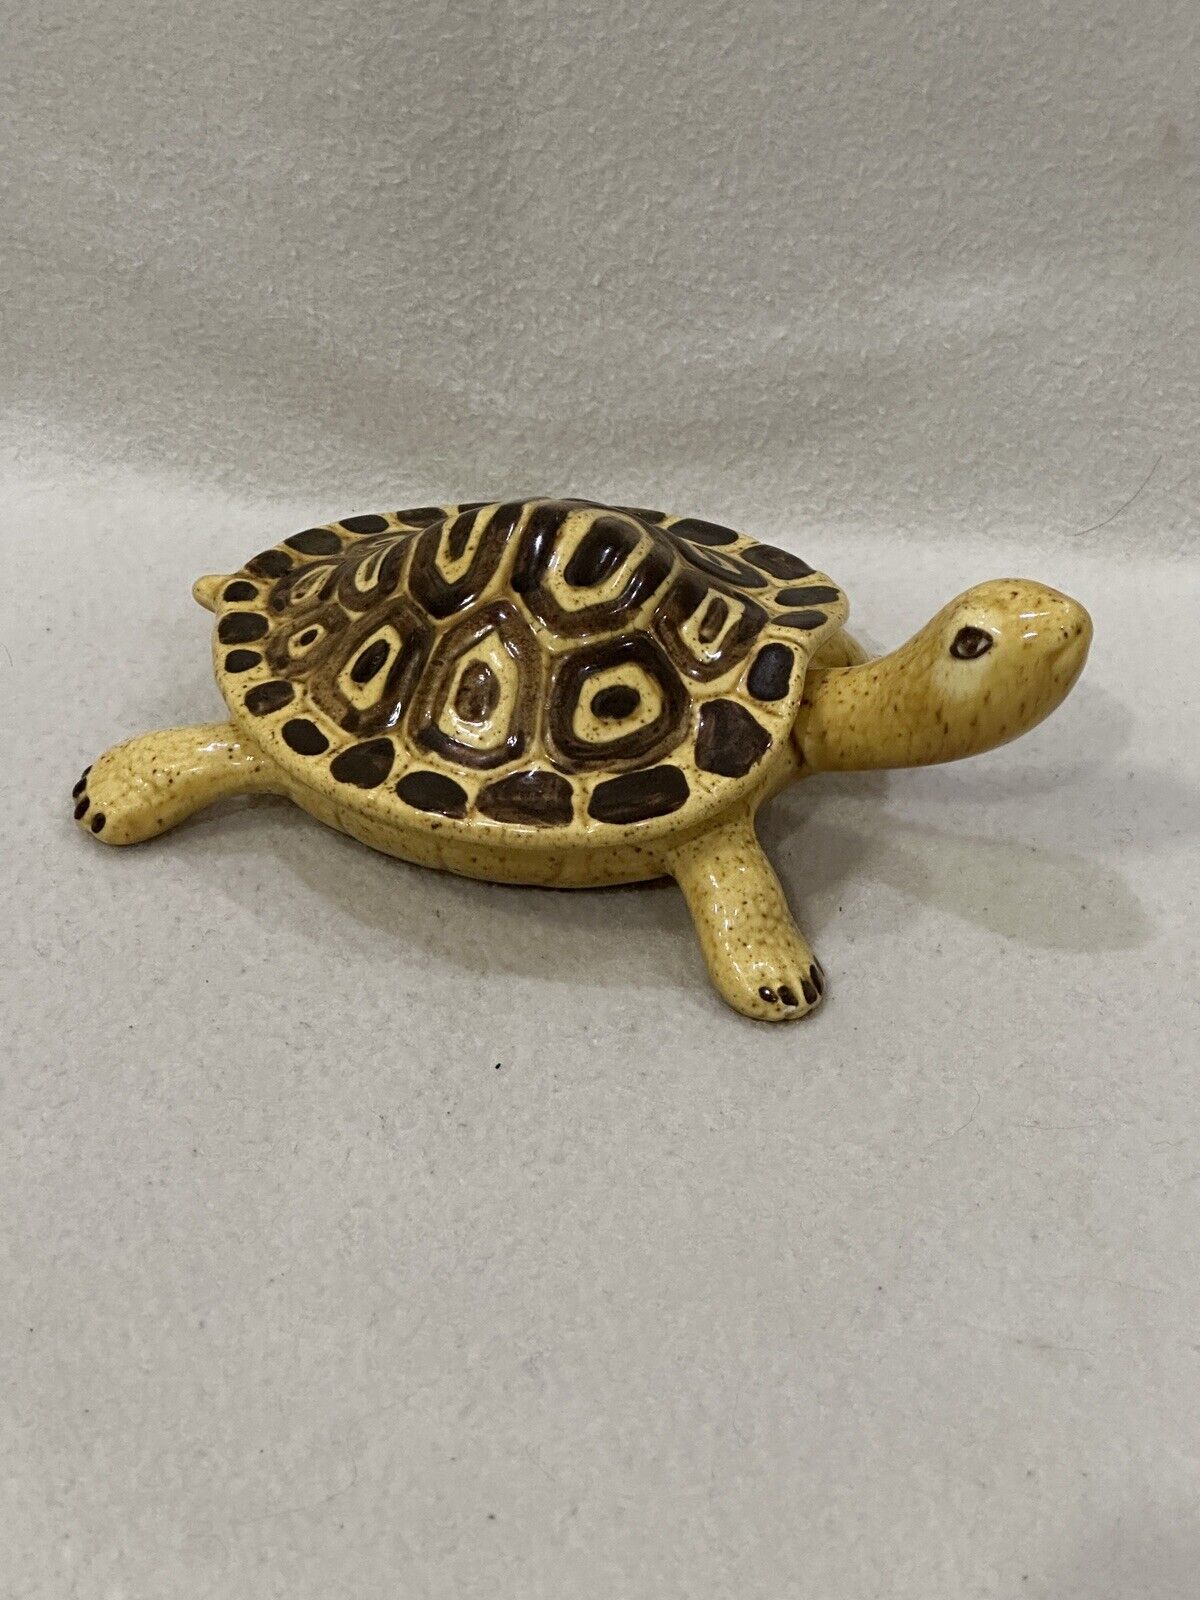 Handmade Pottery Ceramic Turtle Trinket Container - 6.5” x 4” Inches